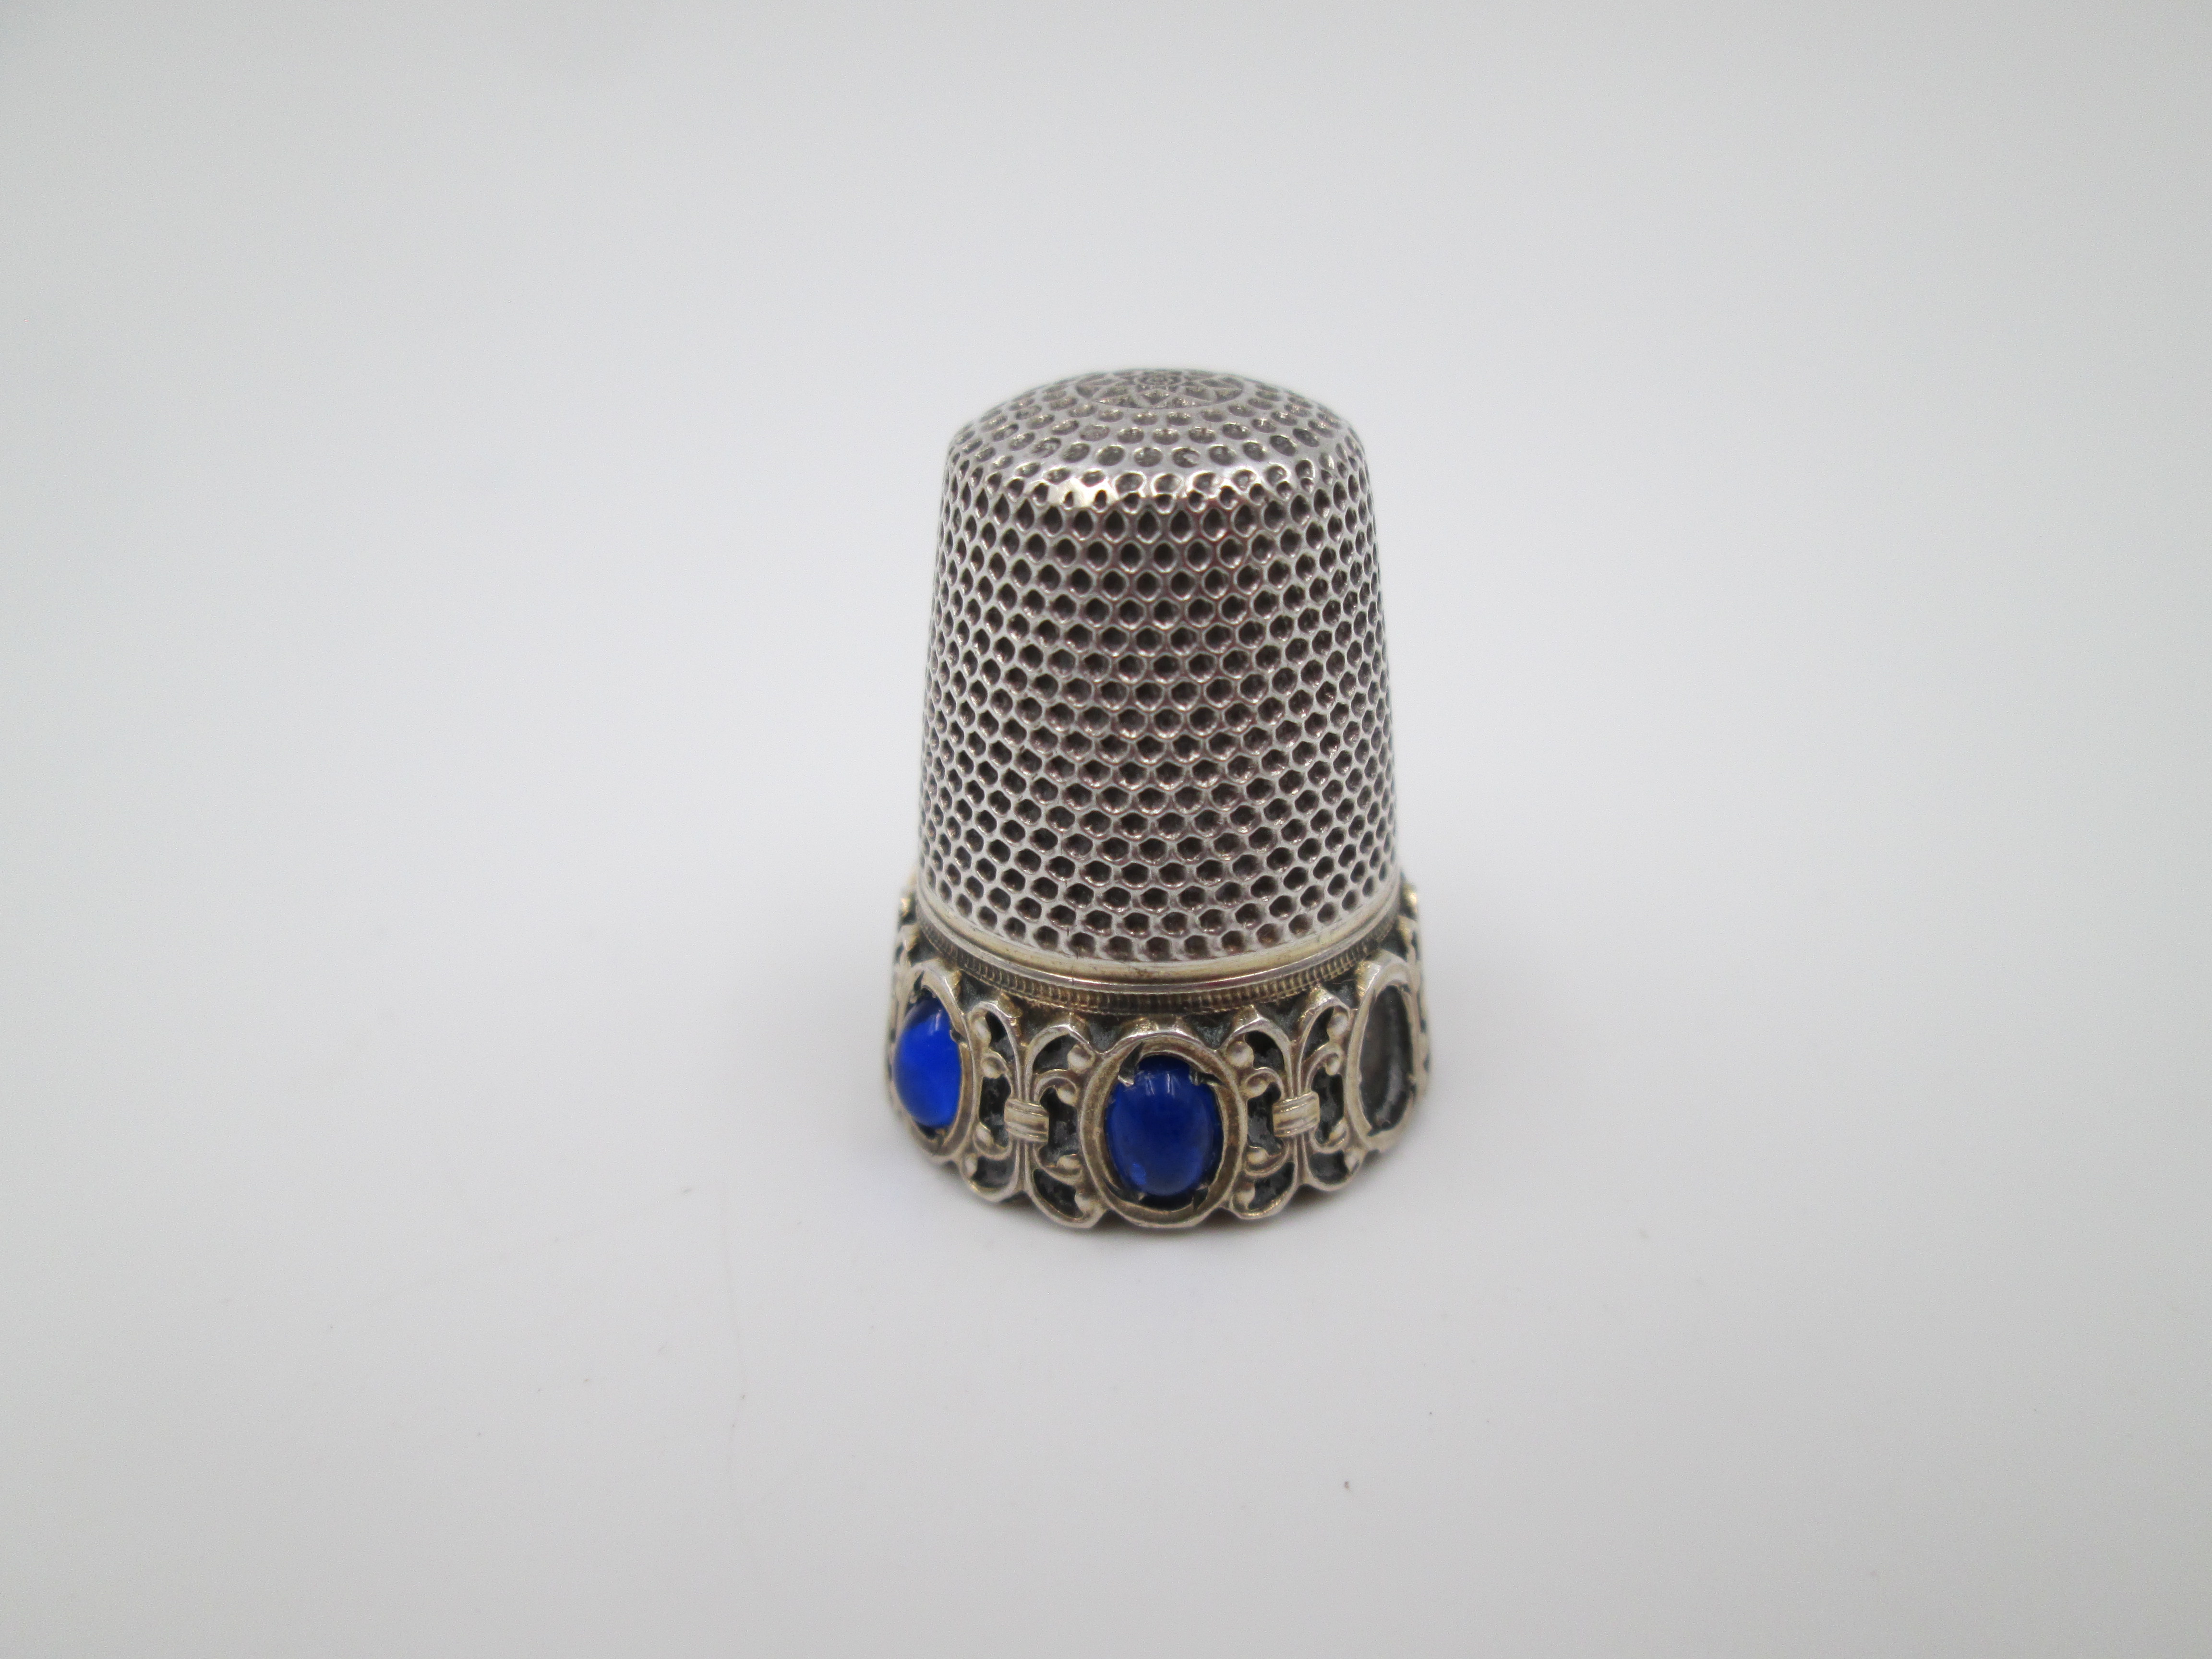 Sewing Thimble Sterling Silver Vermeil Blue Stones